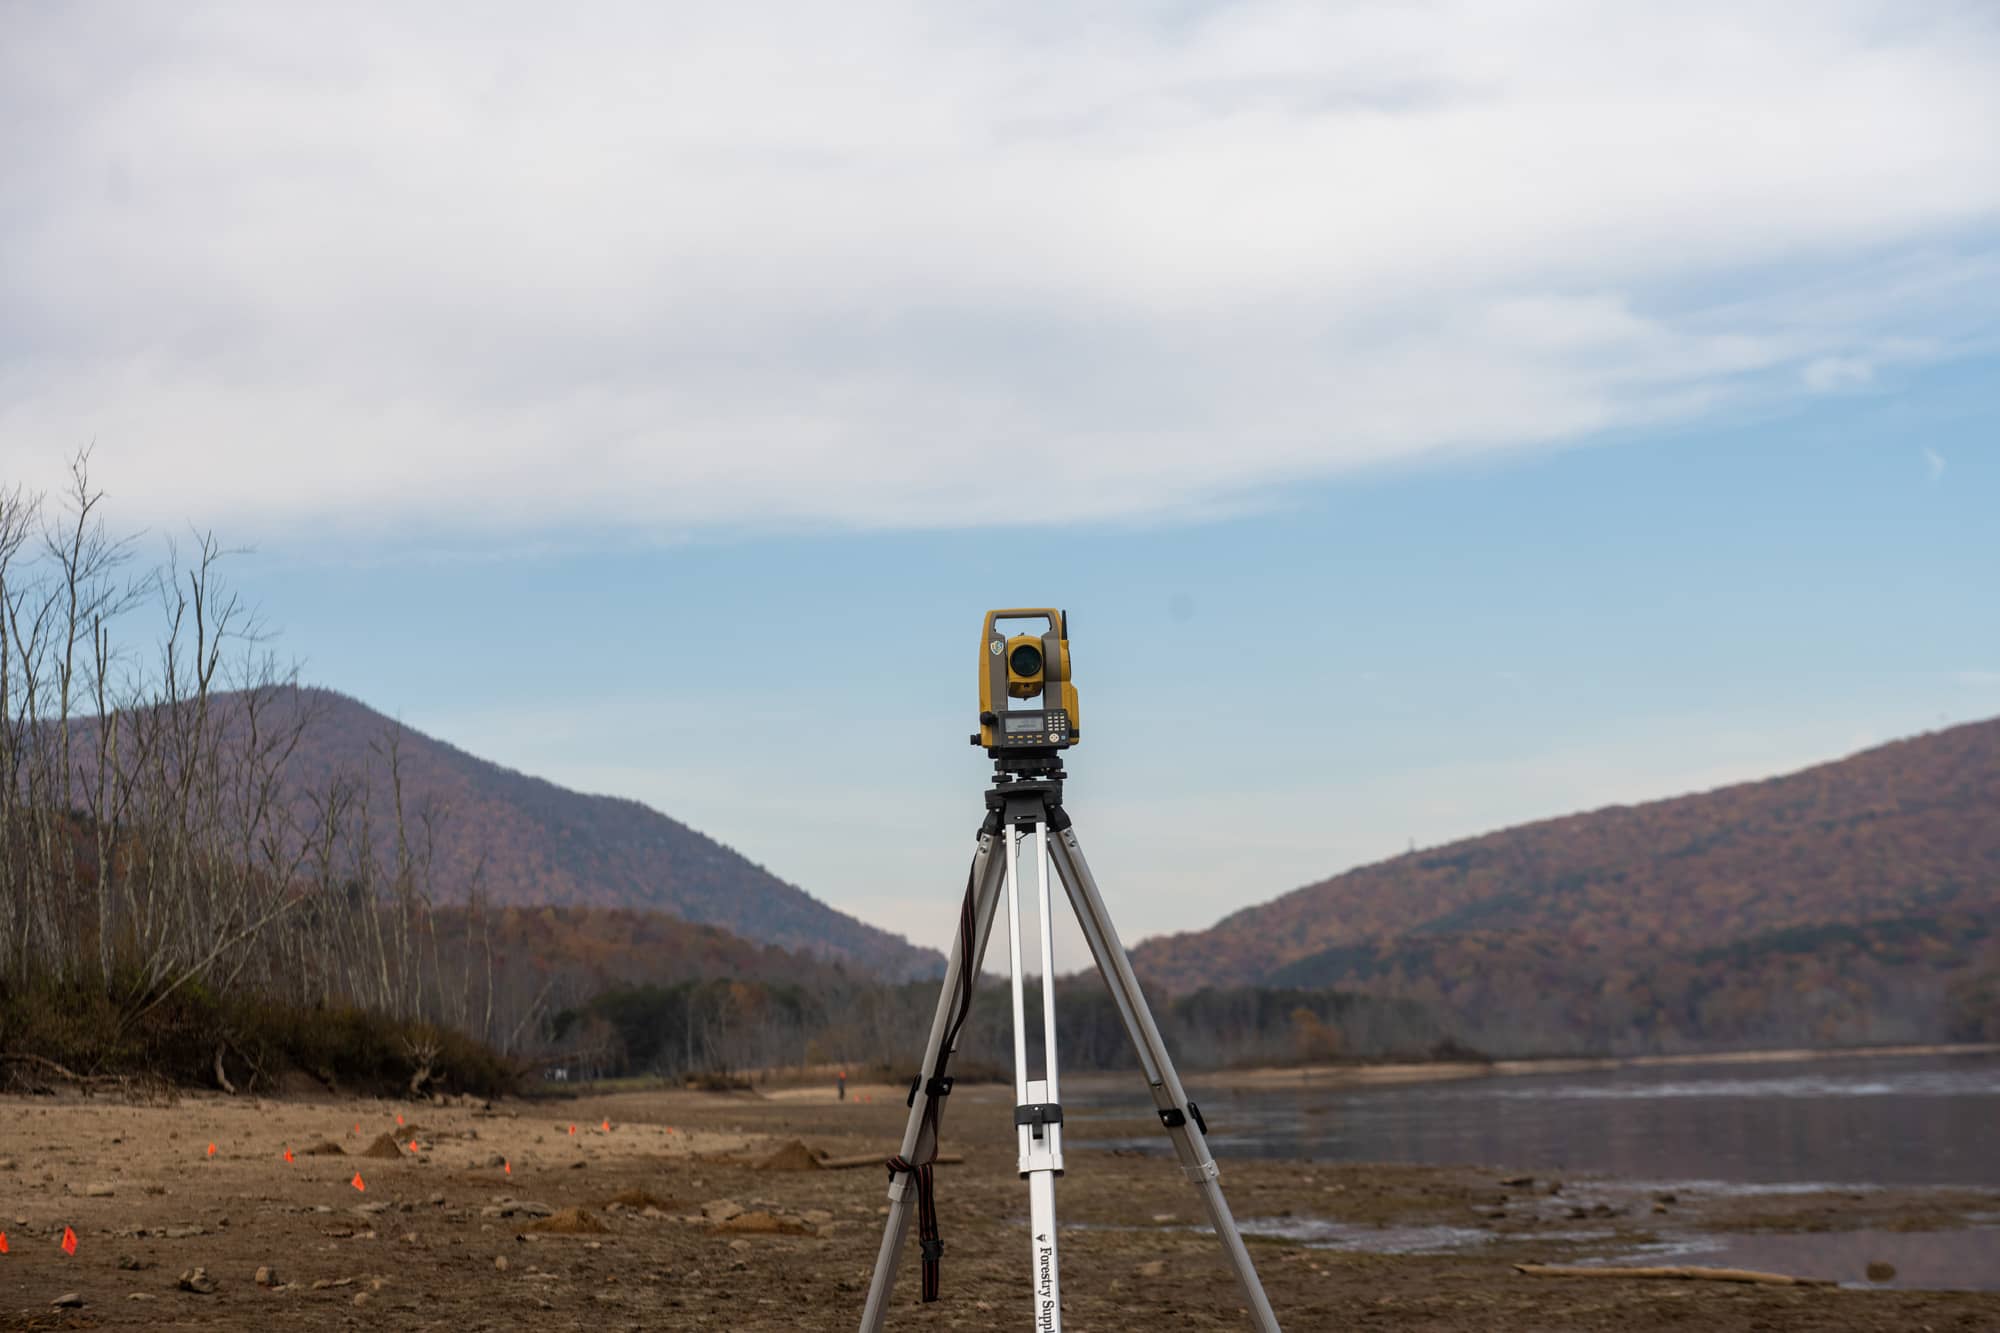 Dr. Gingerich uses a total station to map artifacts with sub-centimeter accuracy 